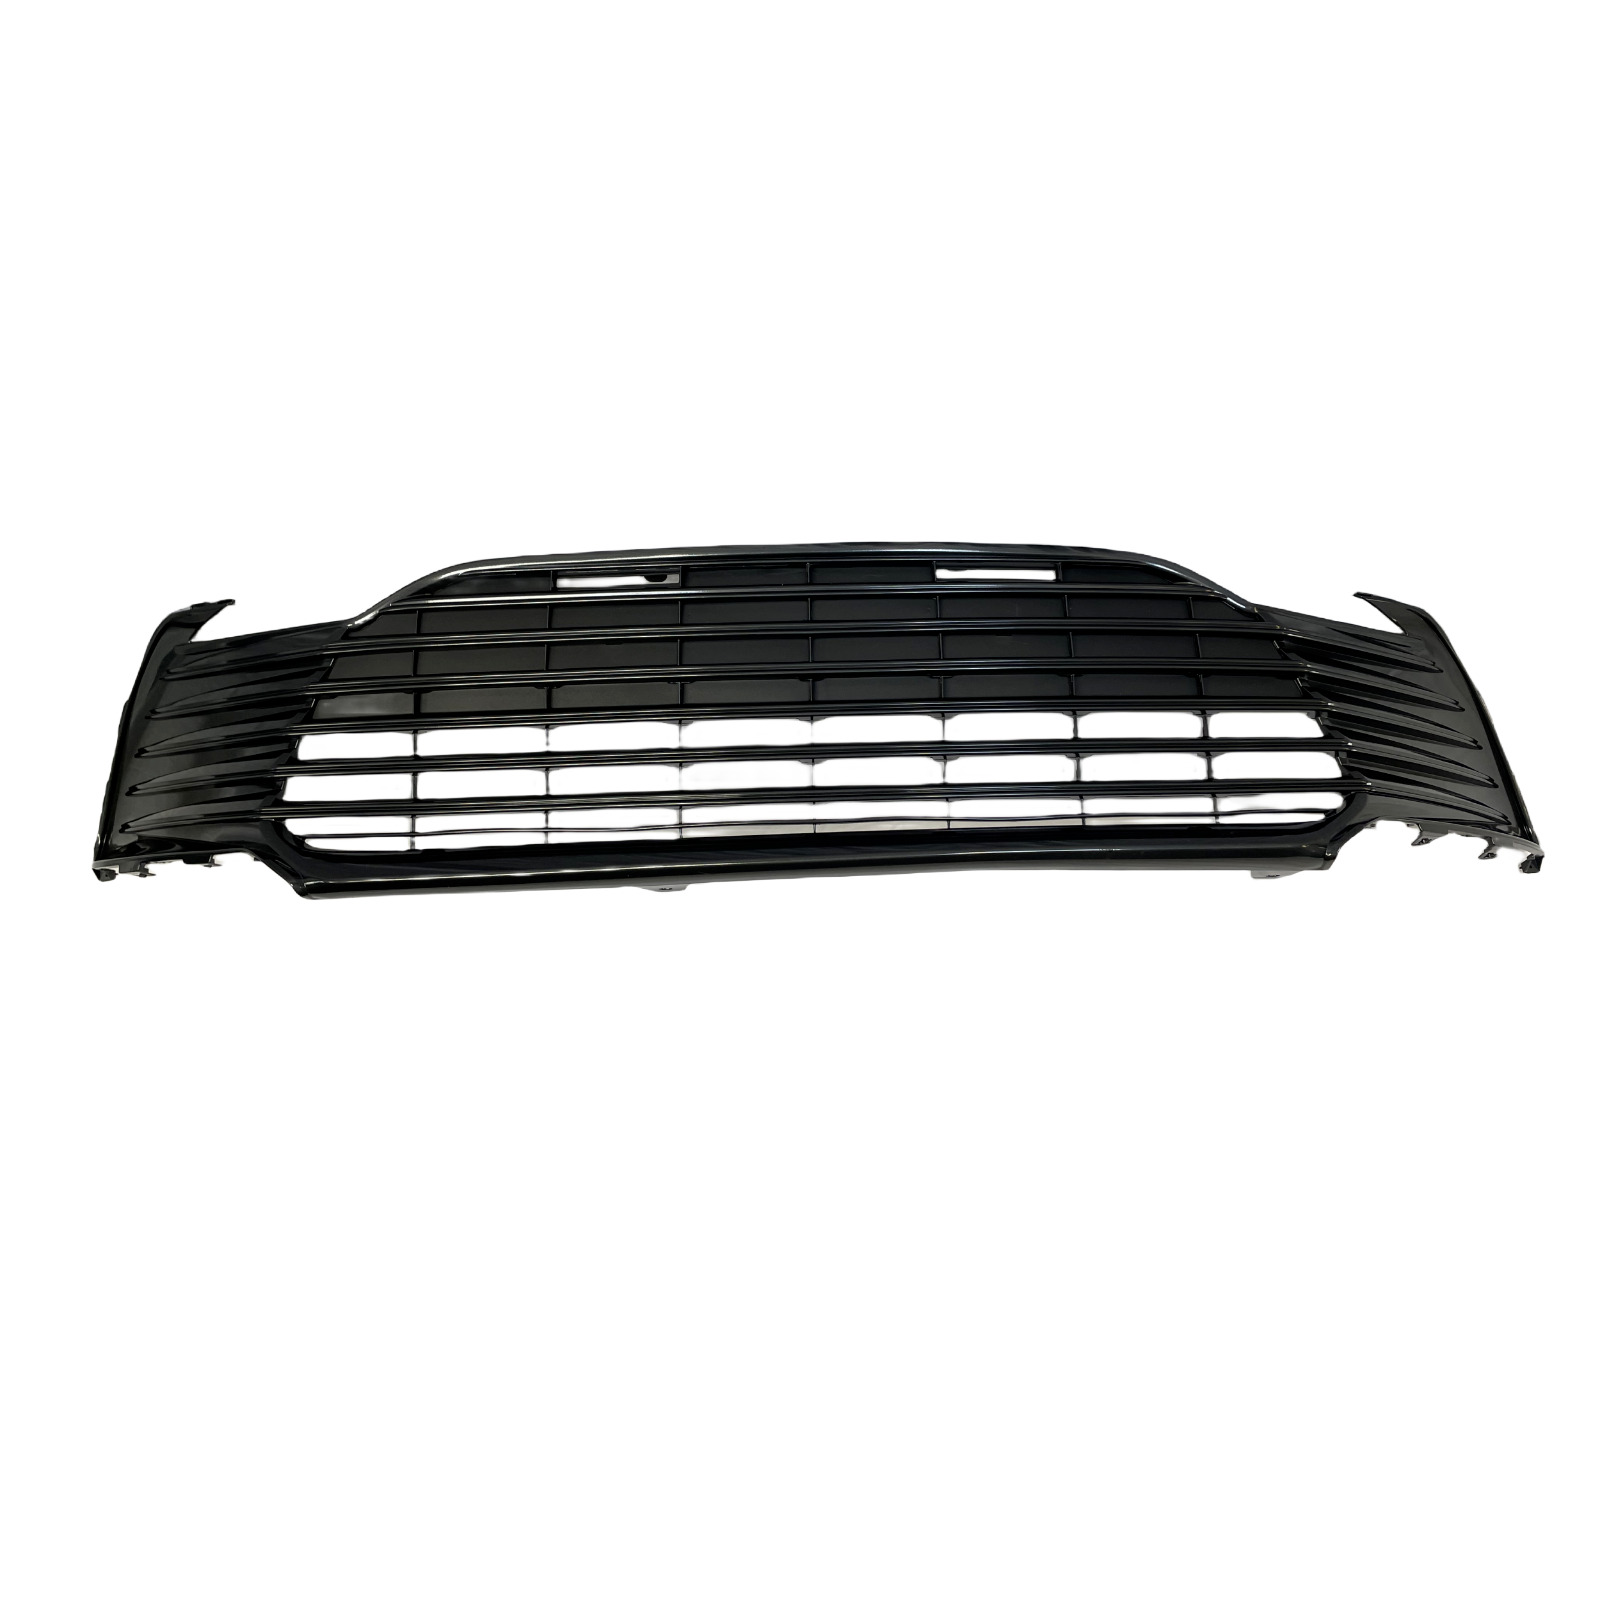 ⭐⭐ FOR 21-23 TOYOTA CAMRY LE FRONT BUMPER LOWER GRILLE GRILL W/O REDAR HOLES ⭐⭐